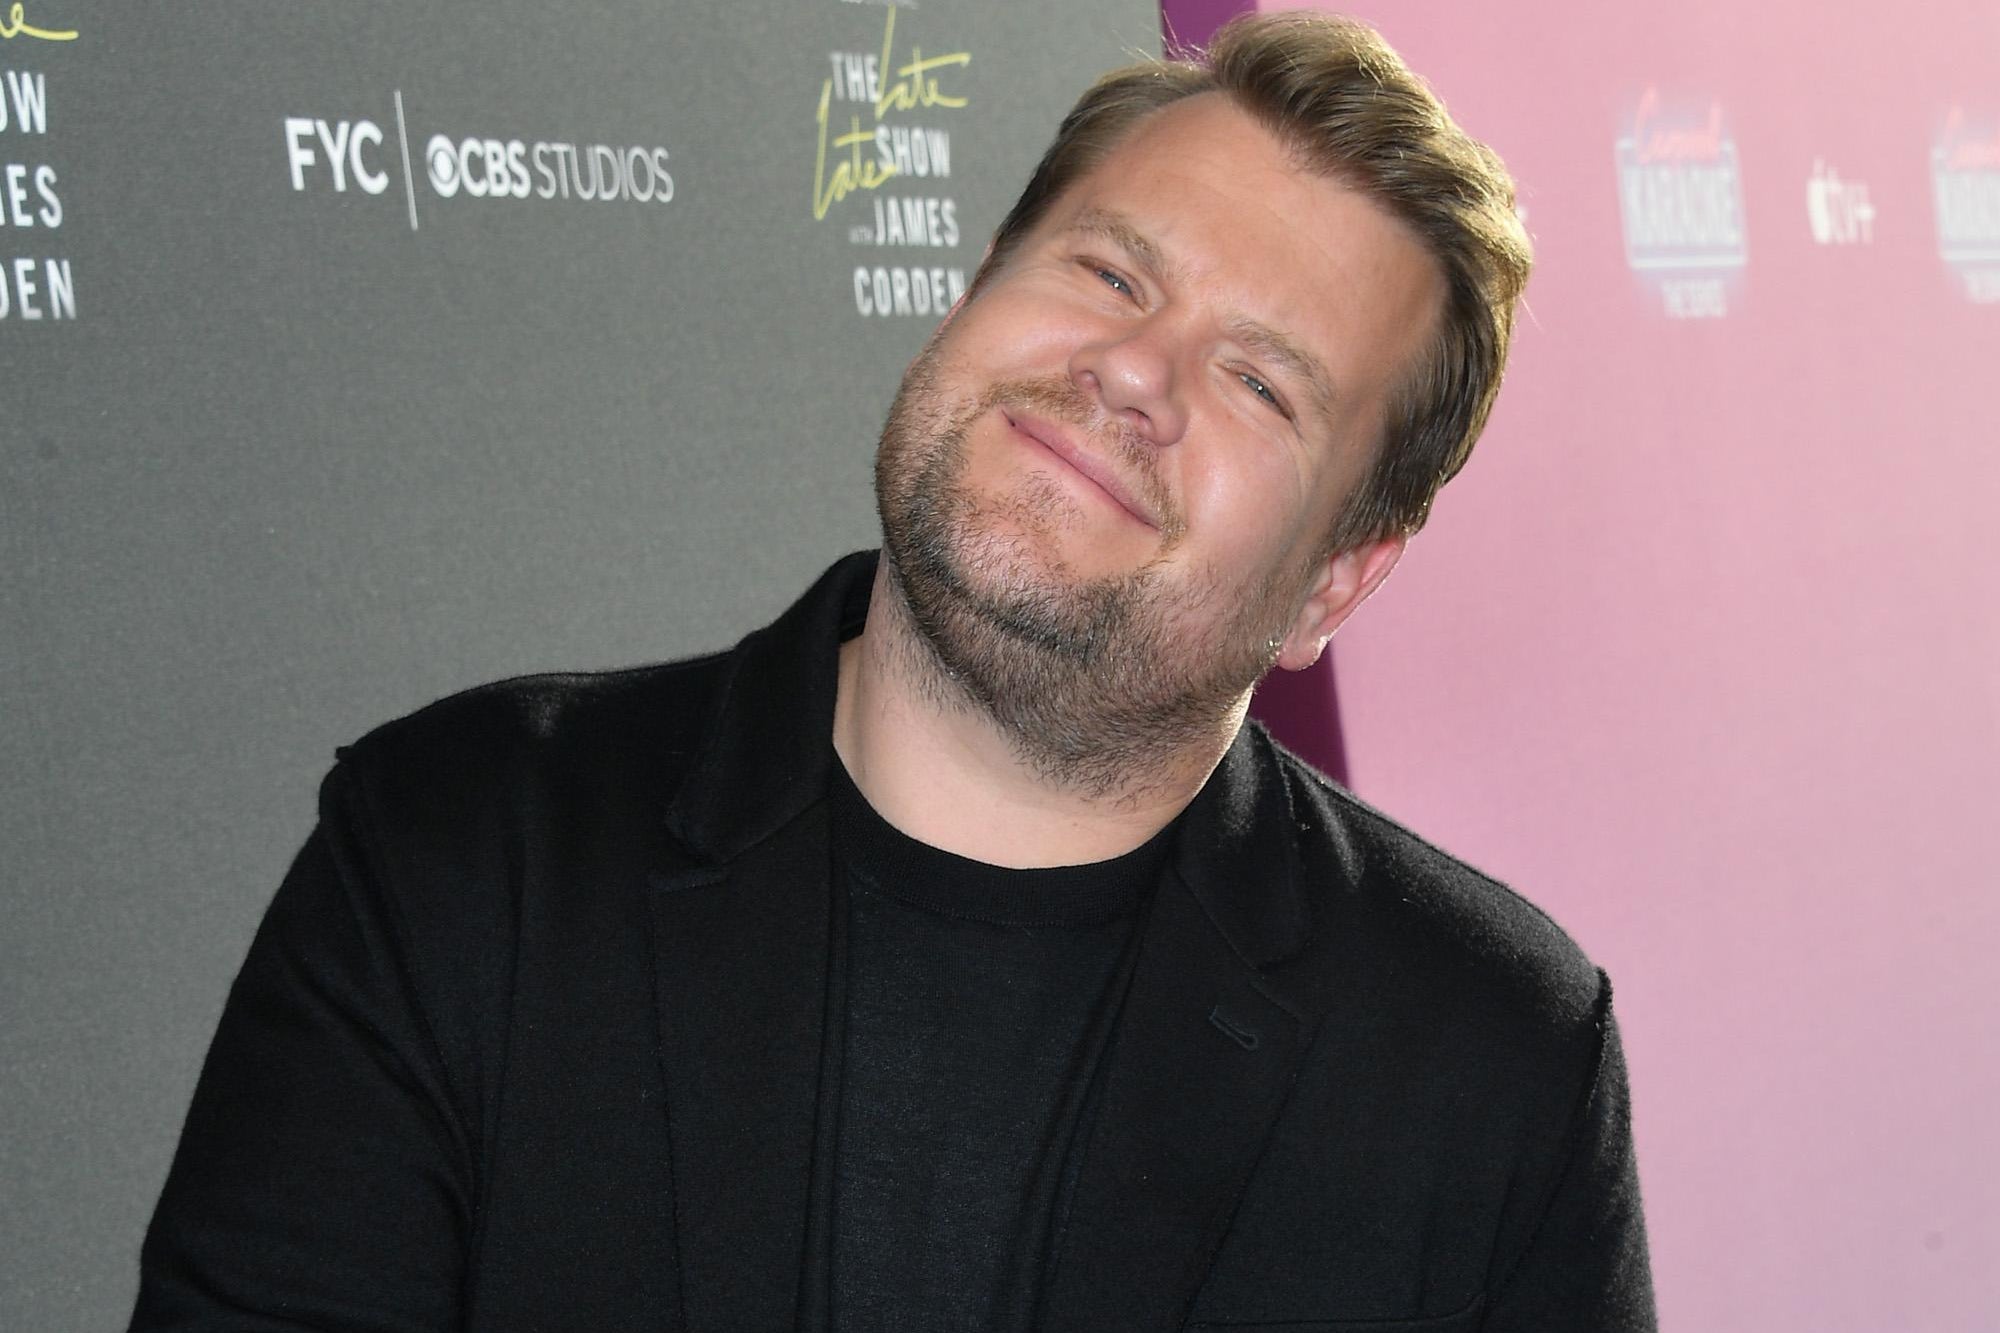 HOLLYWOOD, CALIFORNIA - MAY 12: James Corden attends the FYC event for CBS' "The Late Late Show With James Corden" at NeueHouse Los Angeles on May 12, 2022 in Hollywood, California. (Photo by Allen Berezovsky/Getty Images)